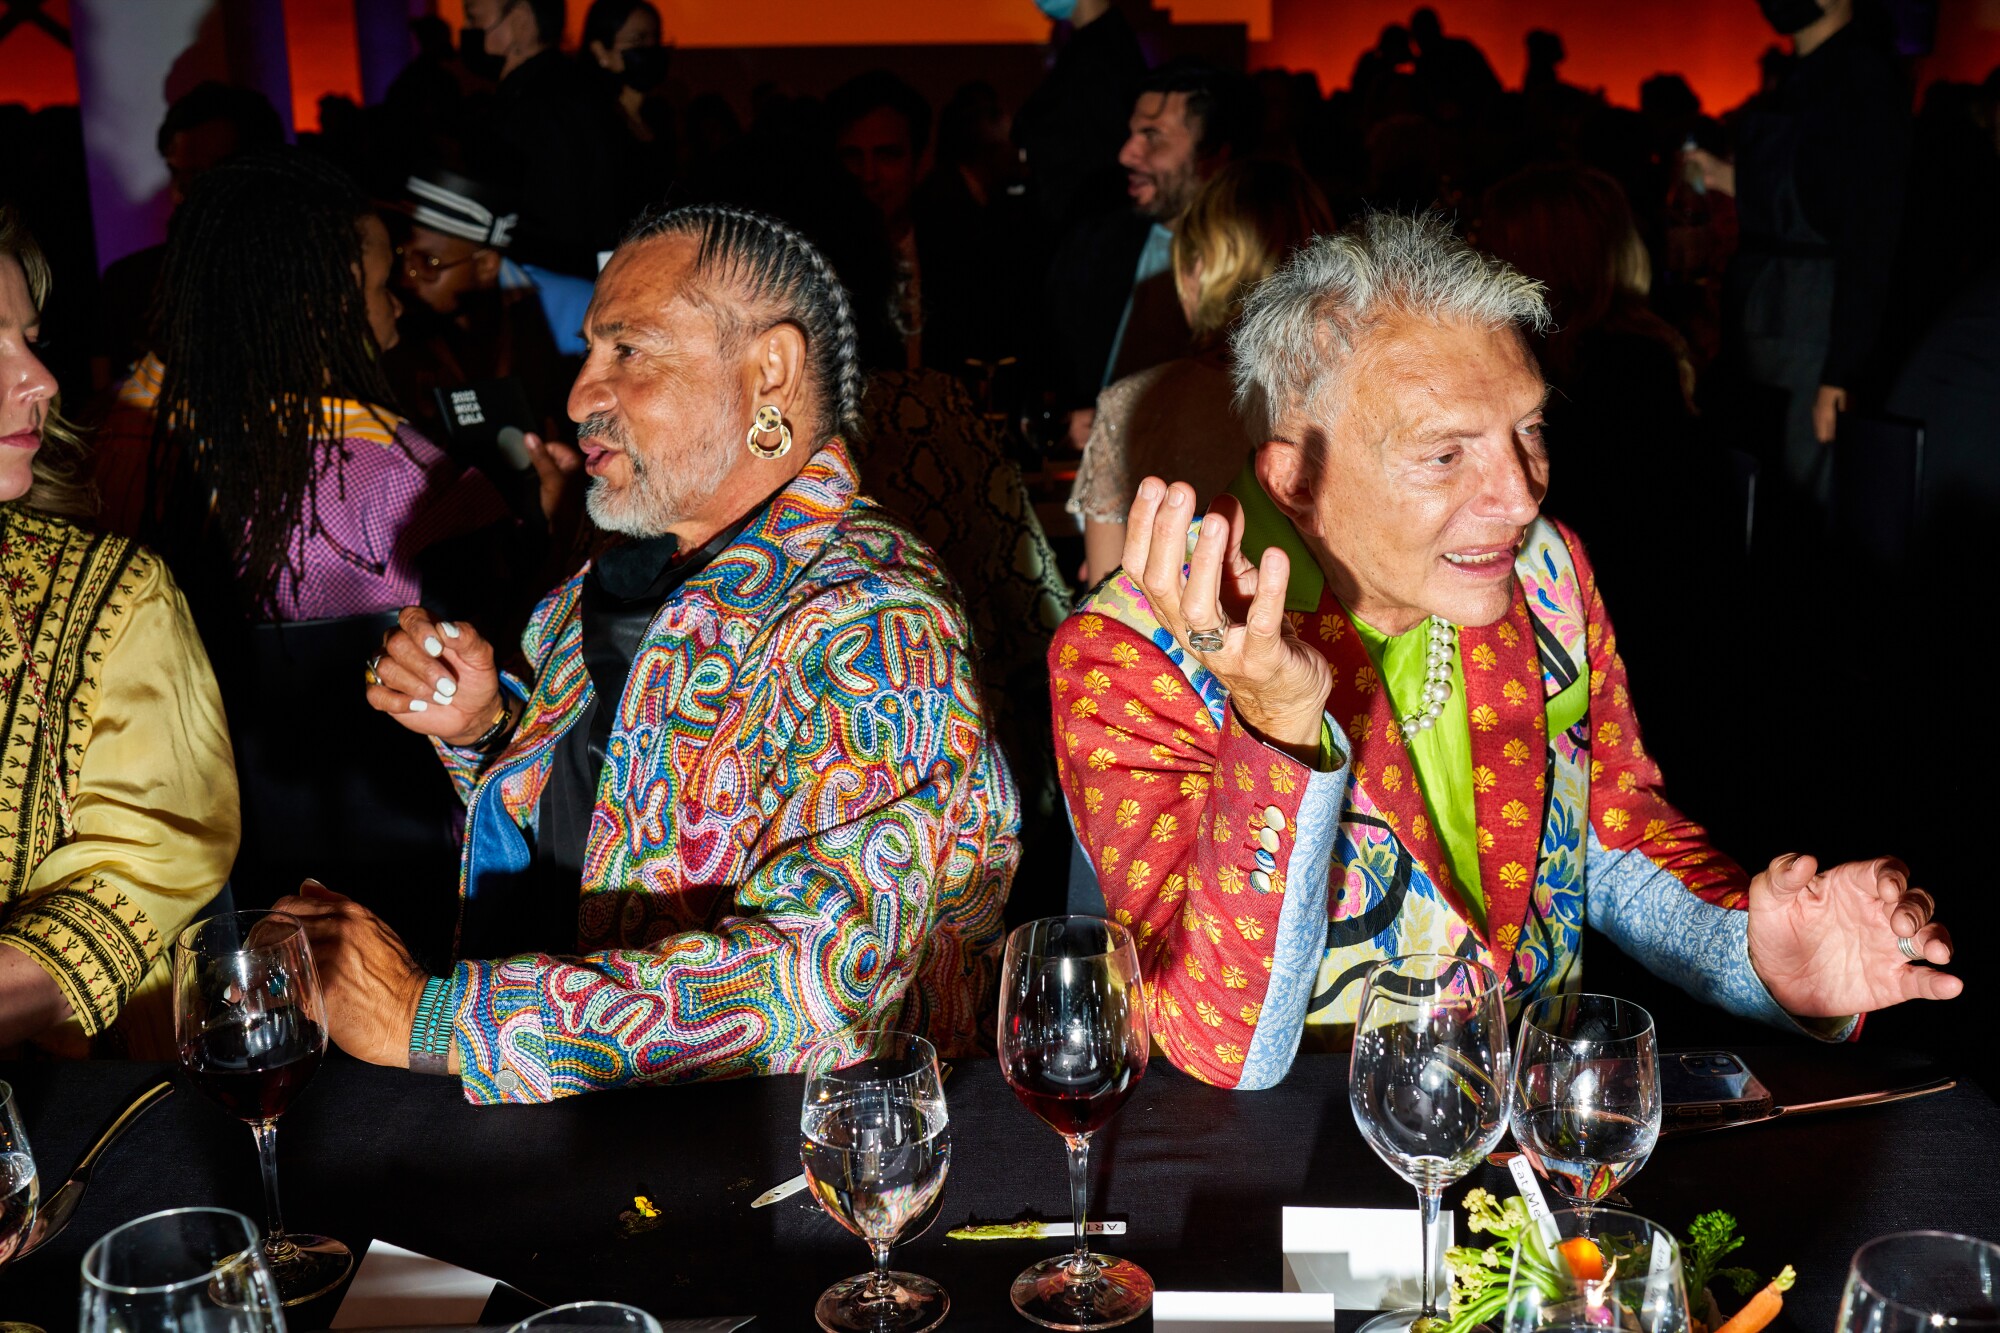 Two men in colorful outfits chat with people at a table.